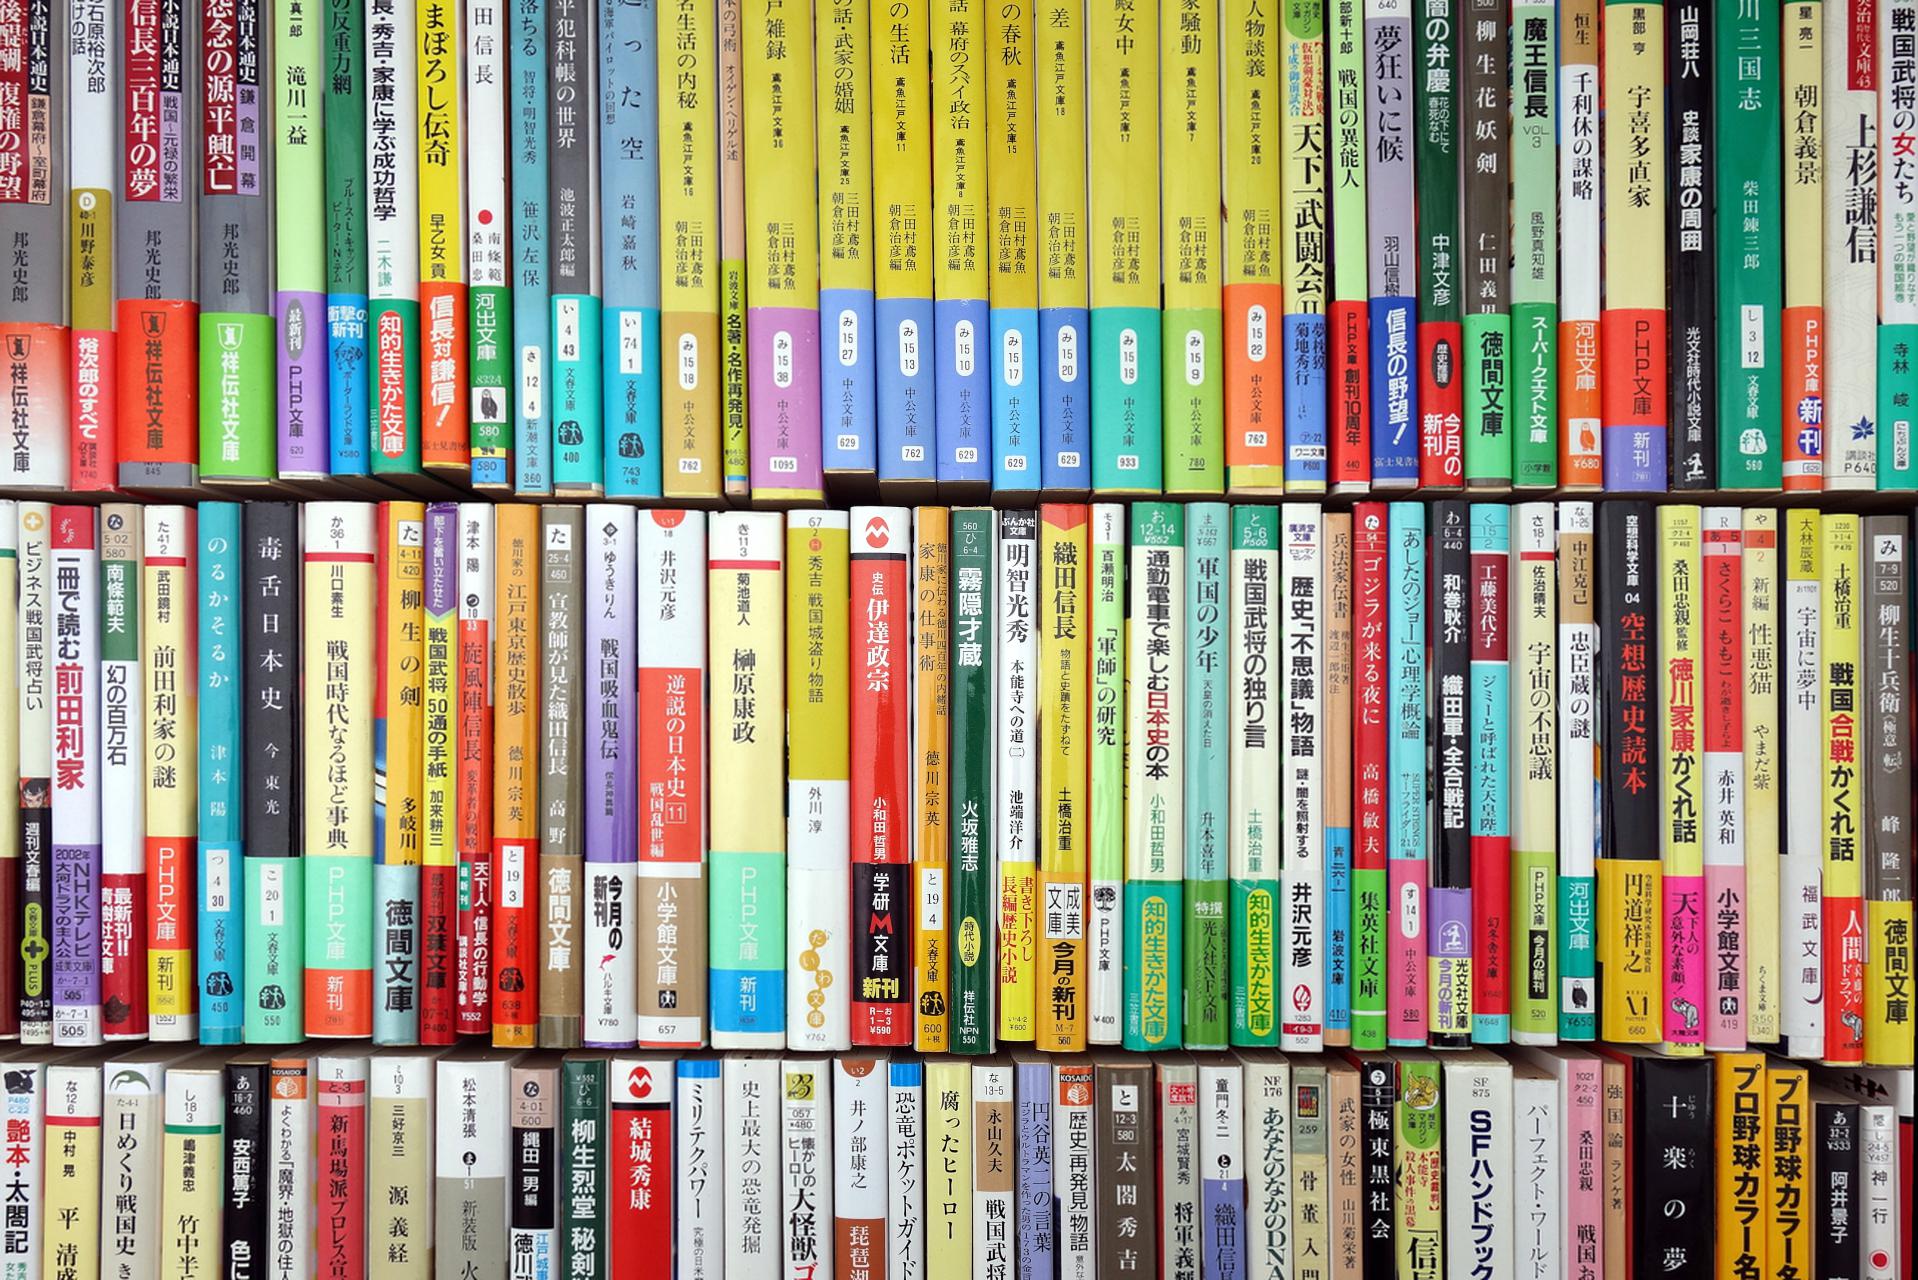 [Photo: Rows of books with Japanese text on their spines]